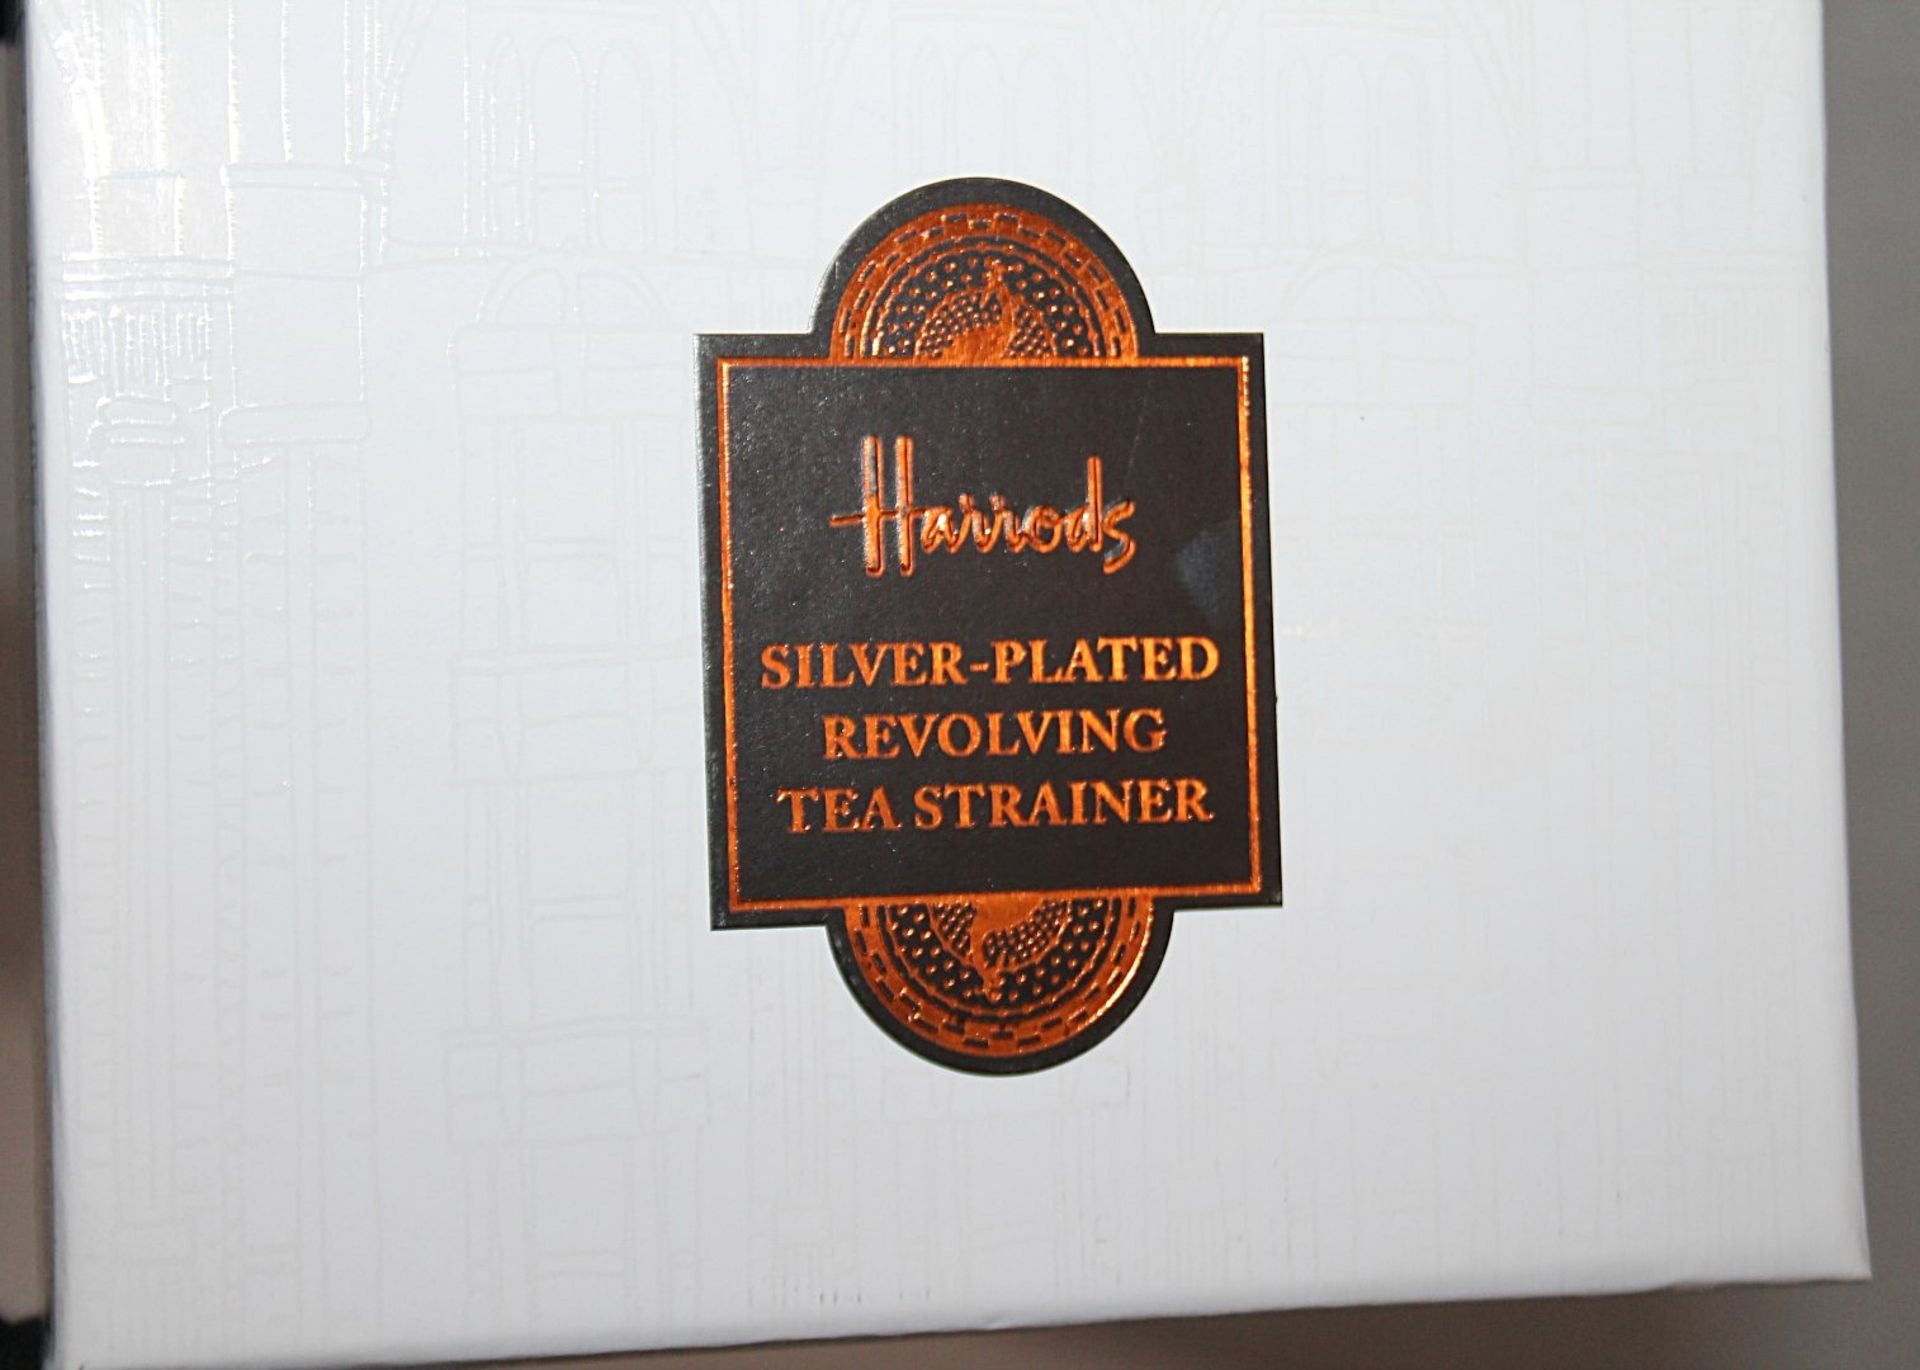 1 x HARRODS Silver-Plated Revolving Strainer - Unused Boxed Stock - Ref: HAS579/FEB22/WH2/C6 - CL987 - Image 4 of 6